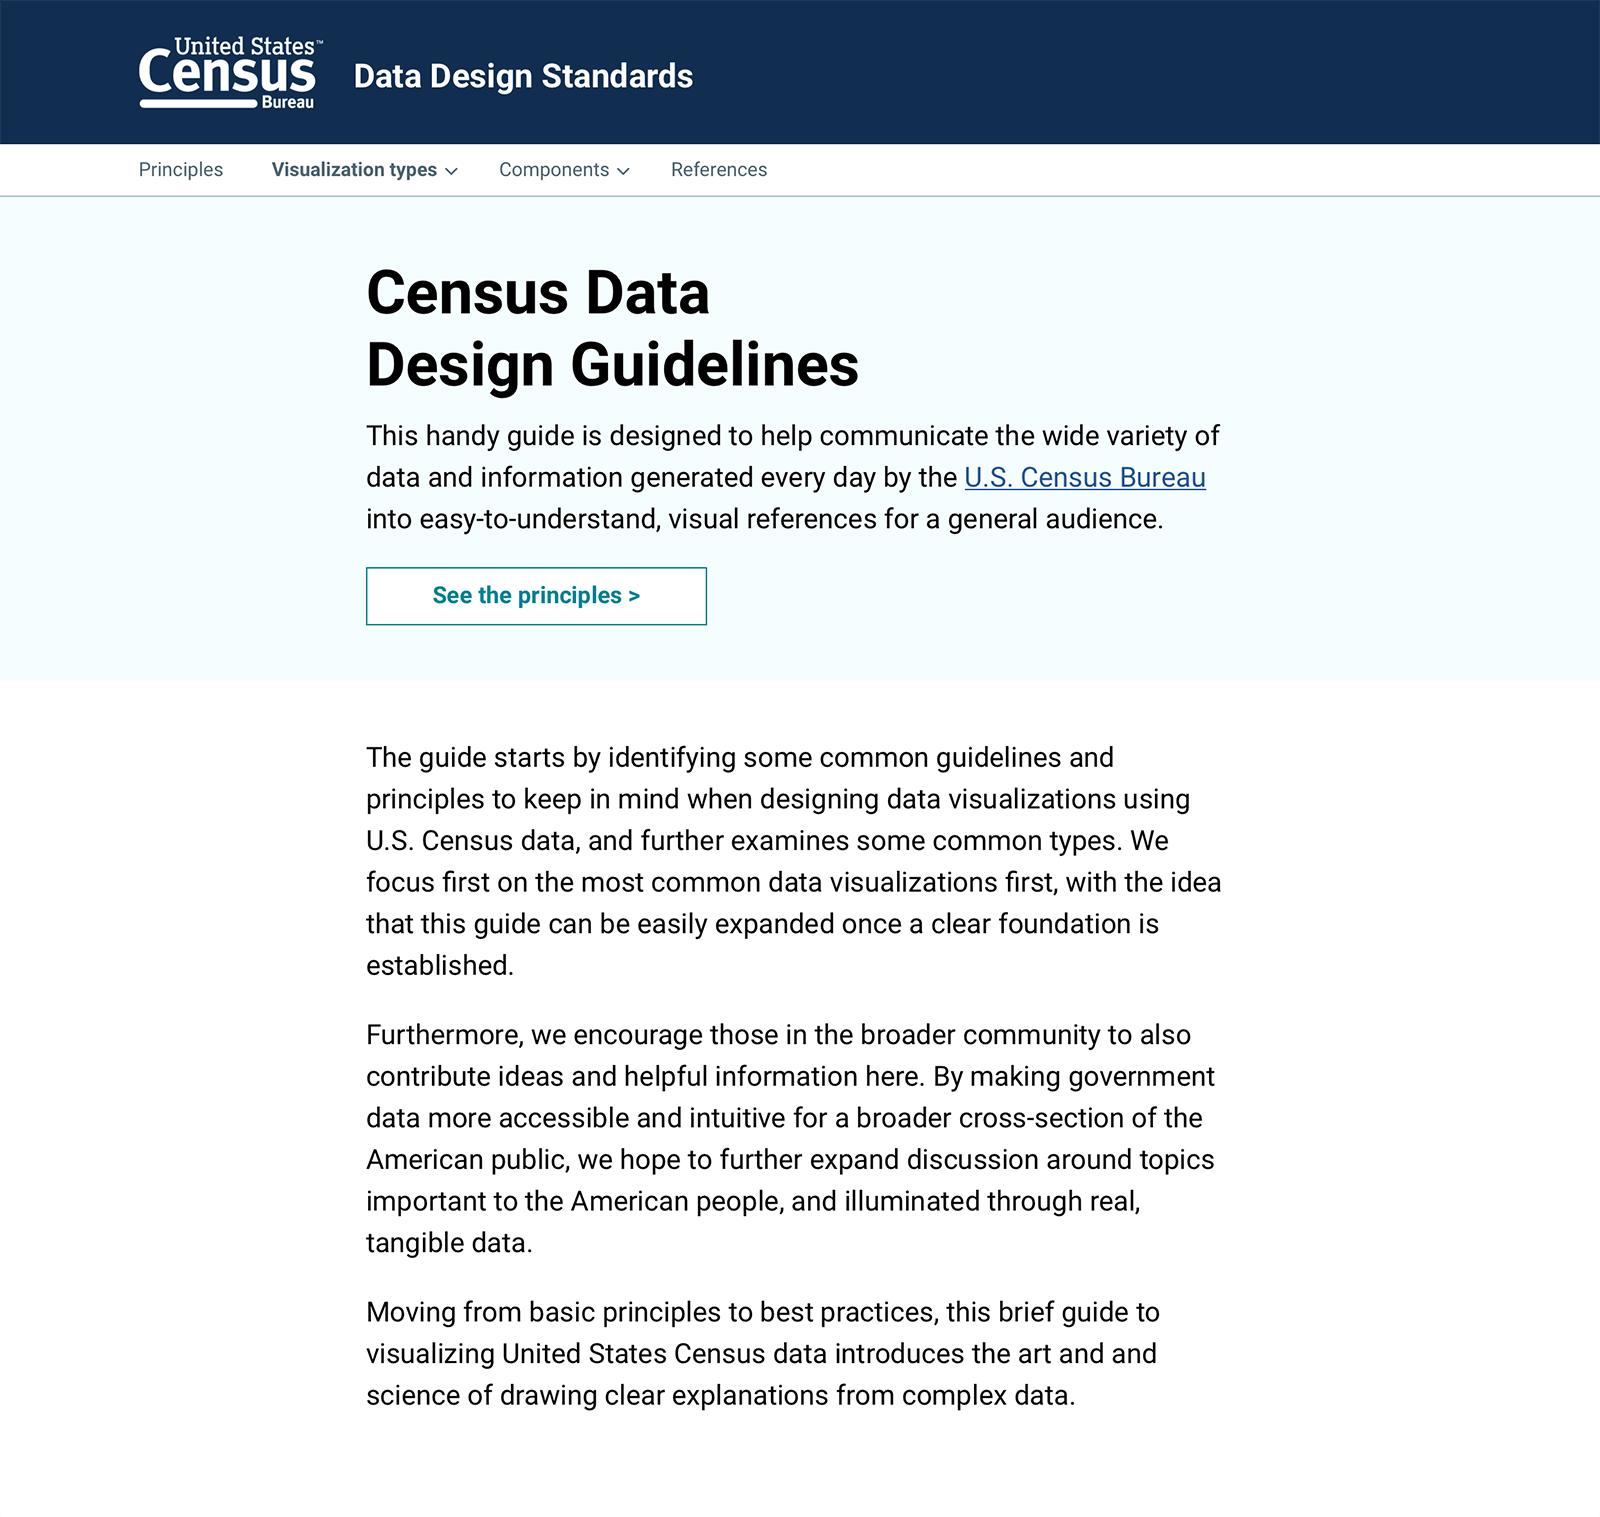 U.S. Census data visualizstion guidelines home page